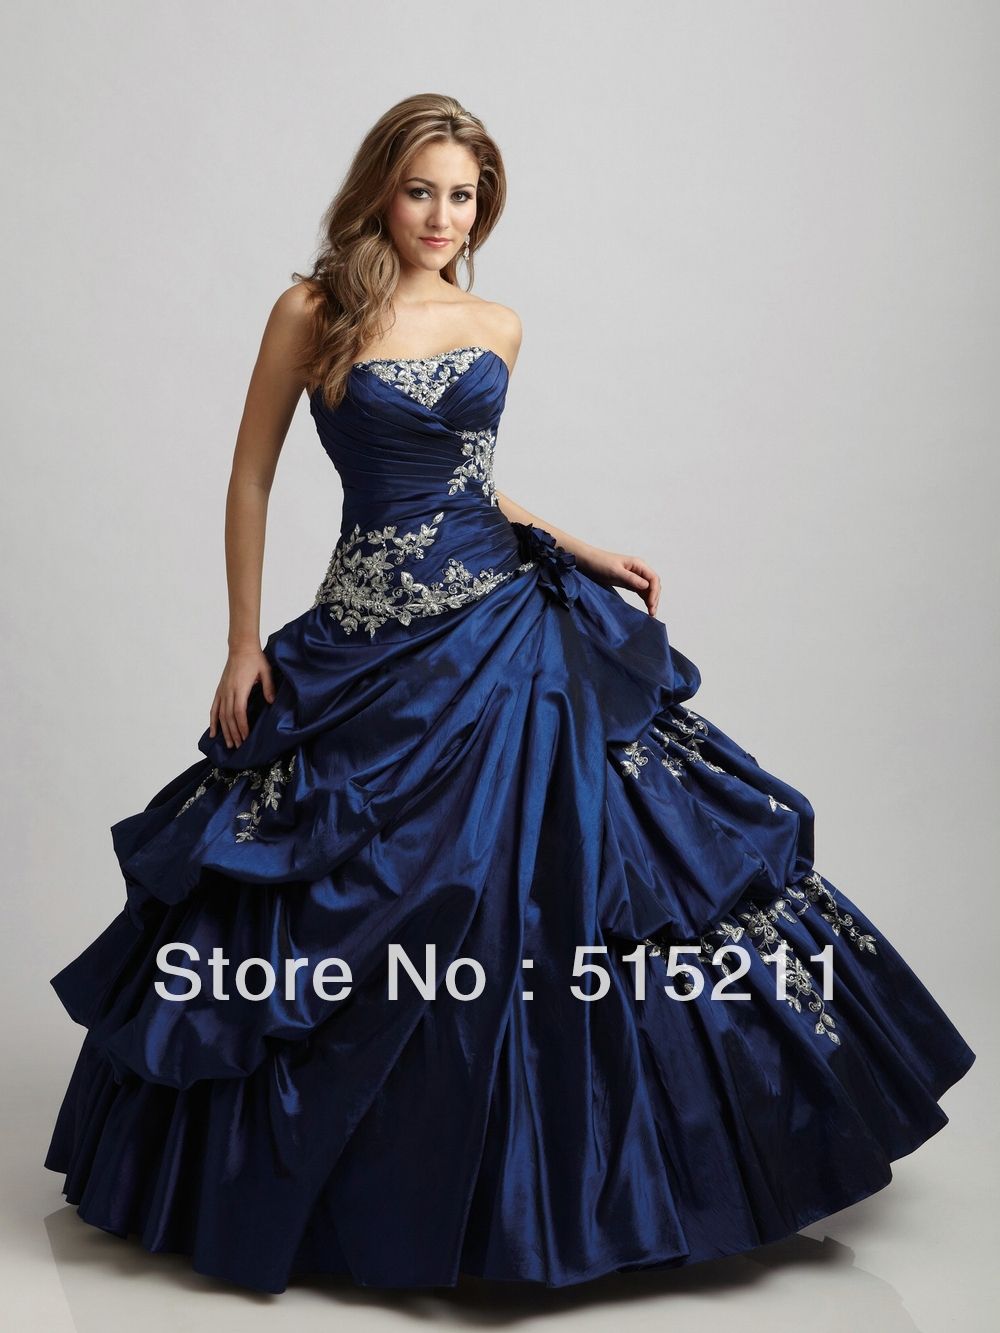 Victorian Ball Gowns Victorian Style Ball Gown Prom